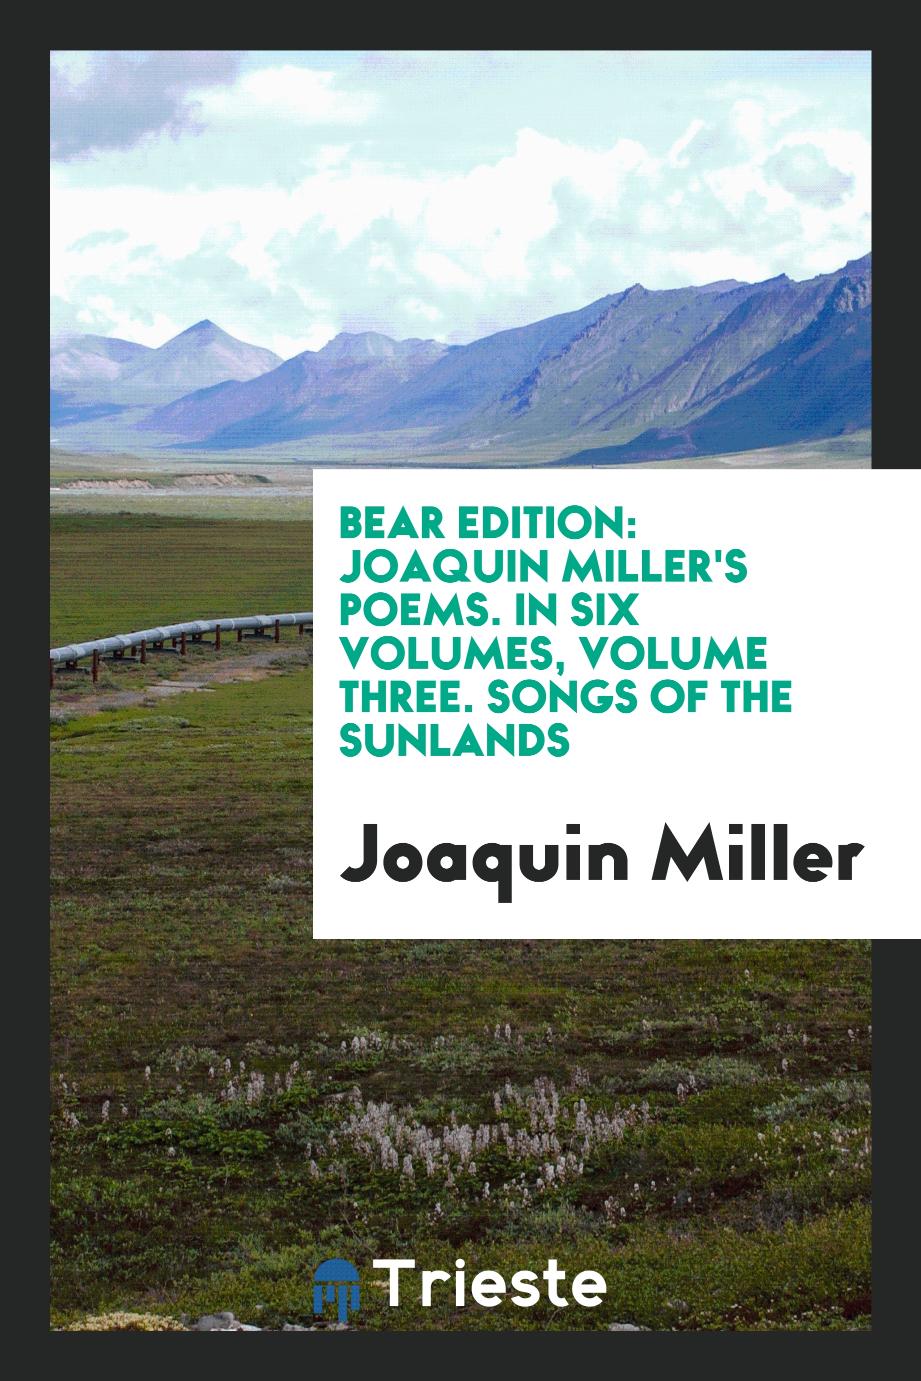 Bear Edition: Joaquin Miller's Poems. In Six Volumes, Volume Three. Songs of the Sunlands